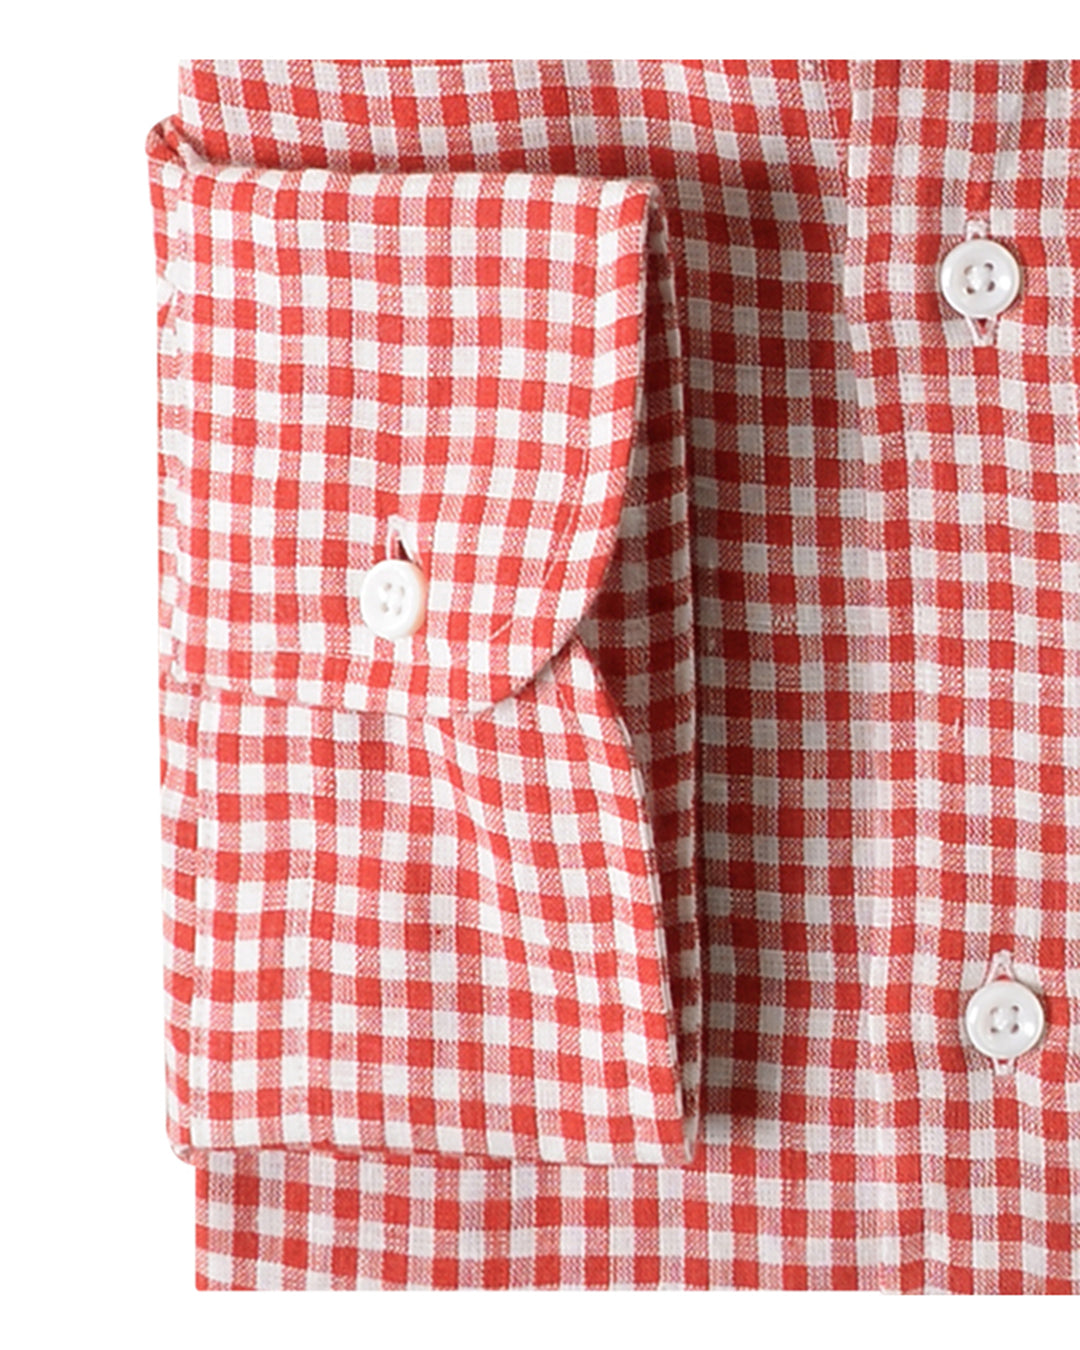 Cuff of the custom linen shirt for men in red and white gingham checks by Luxire Clothing